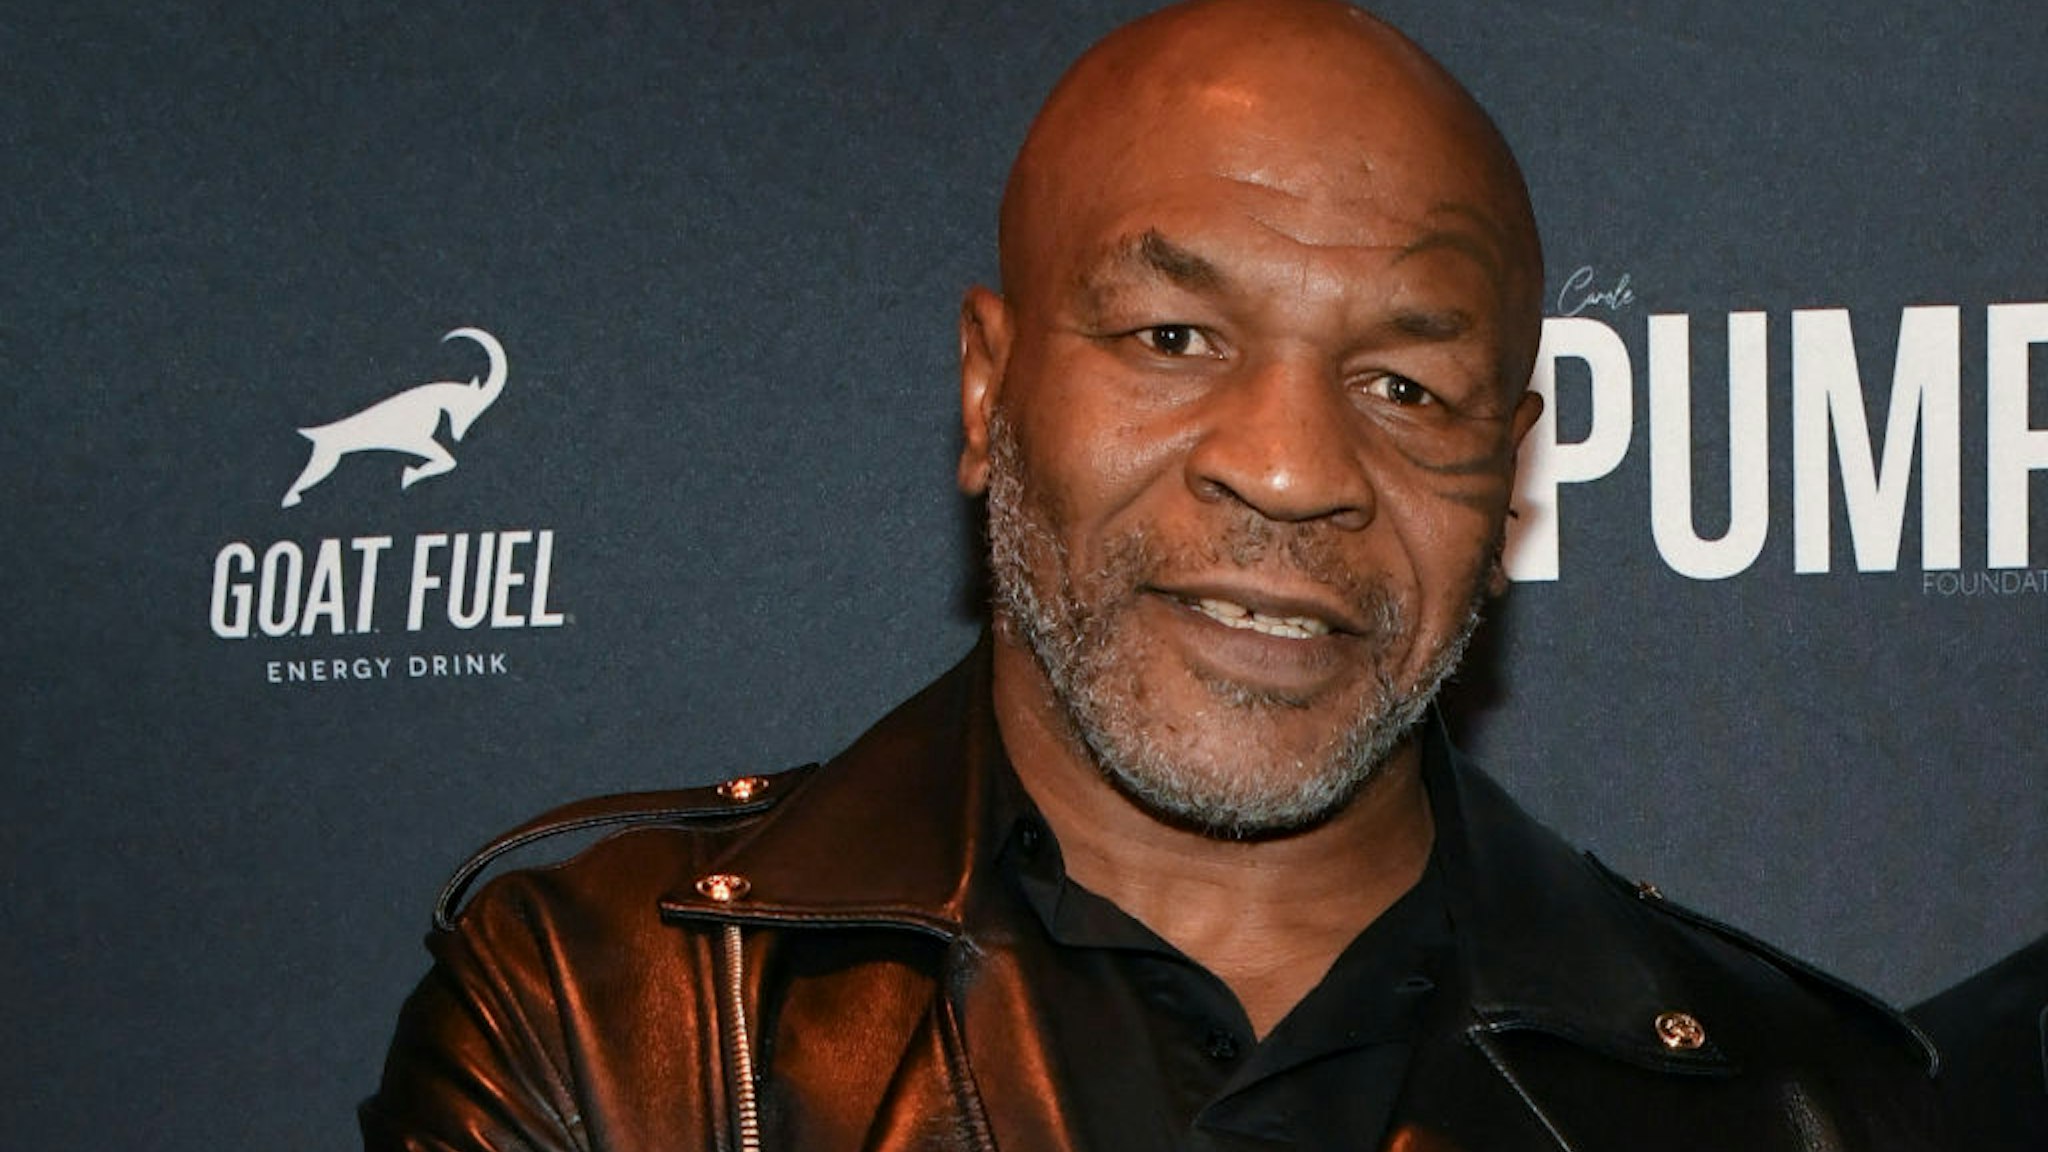 Mike Tyson won't be charged in the scuffle aboard a JetBlue flight after prosecutors determined the other man provoked it